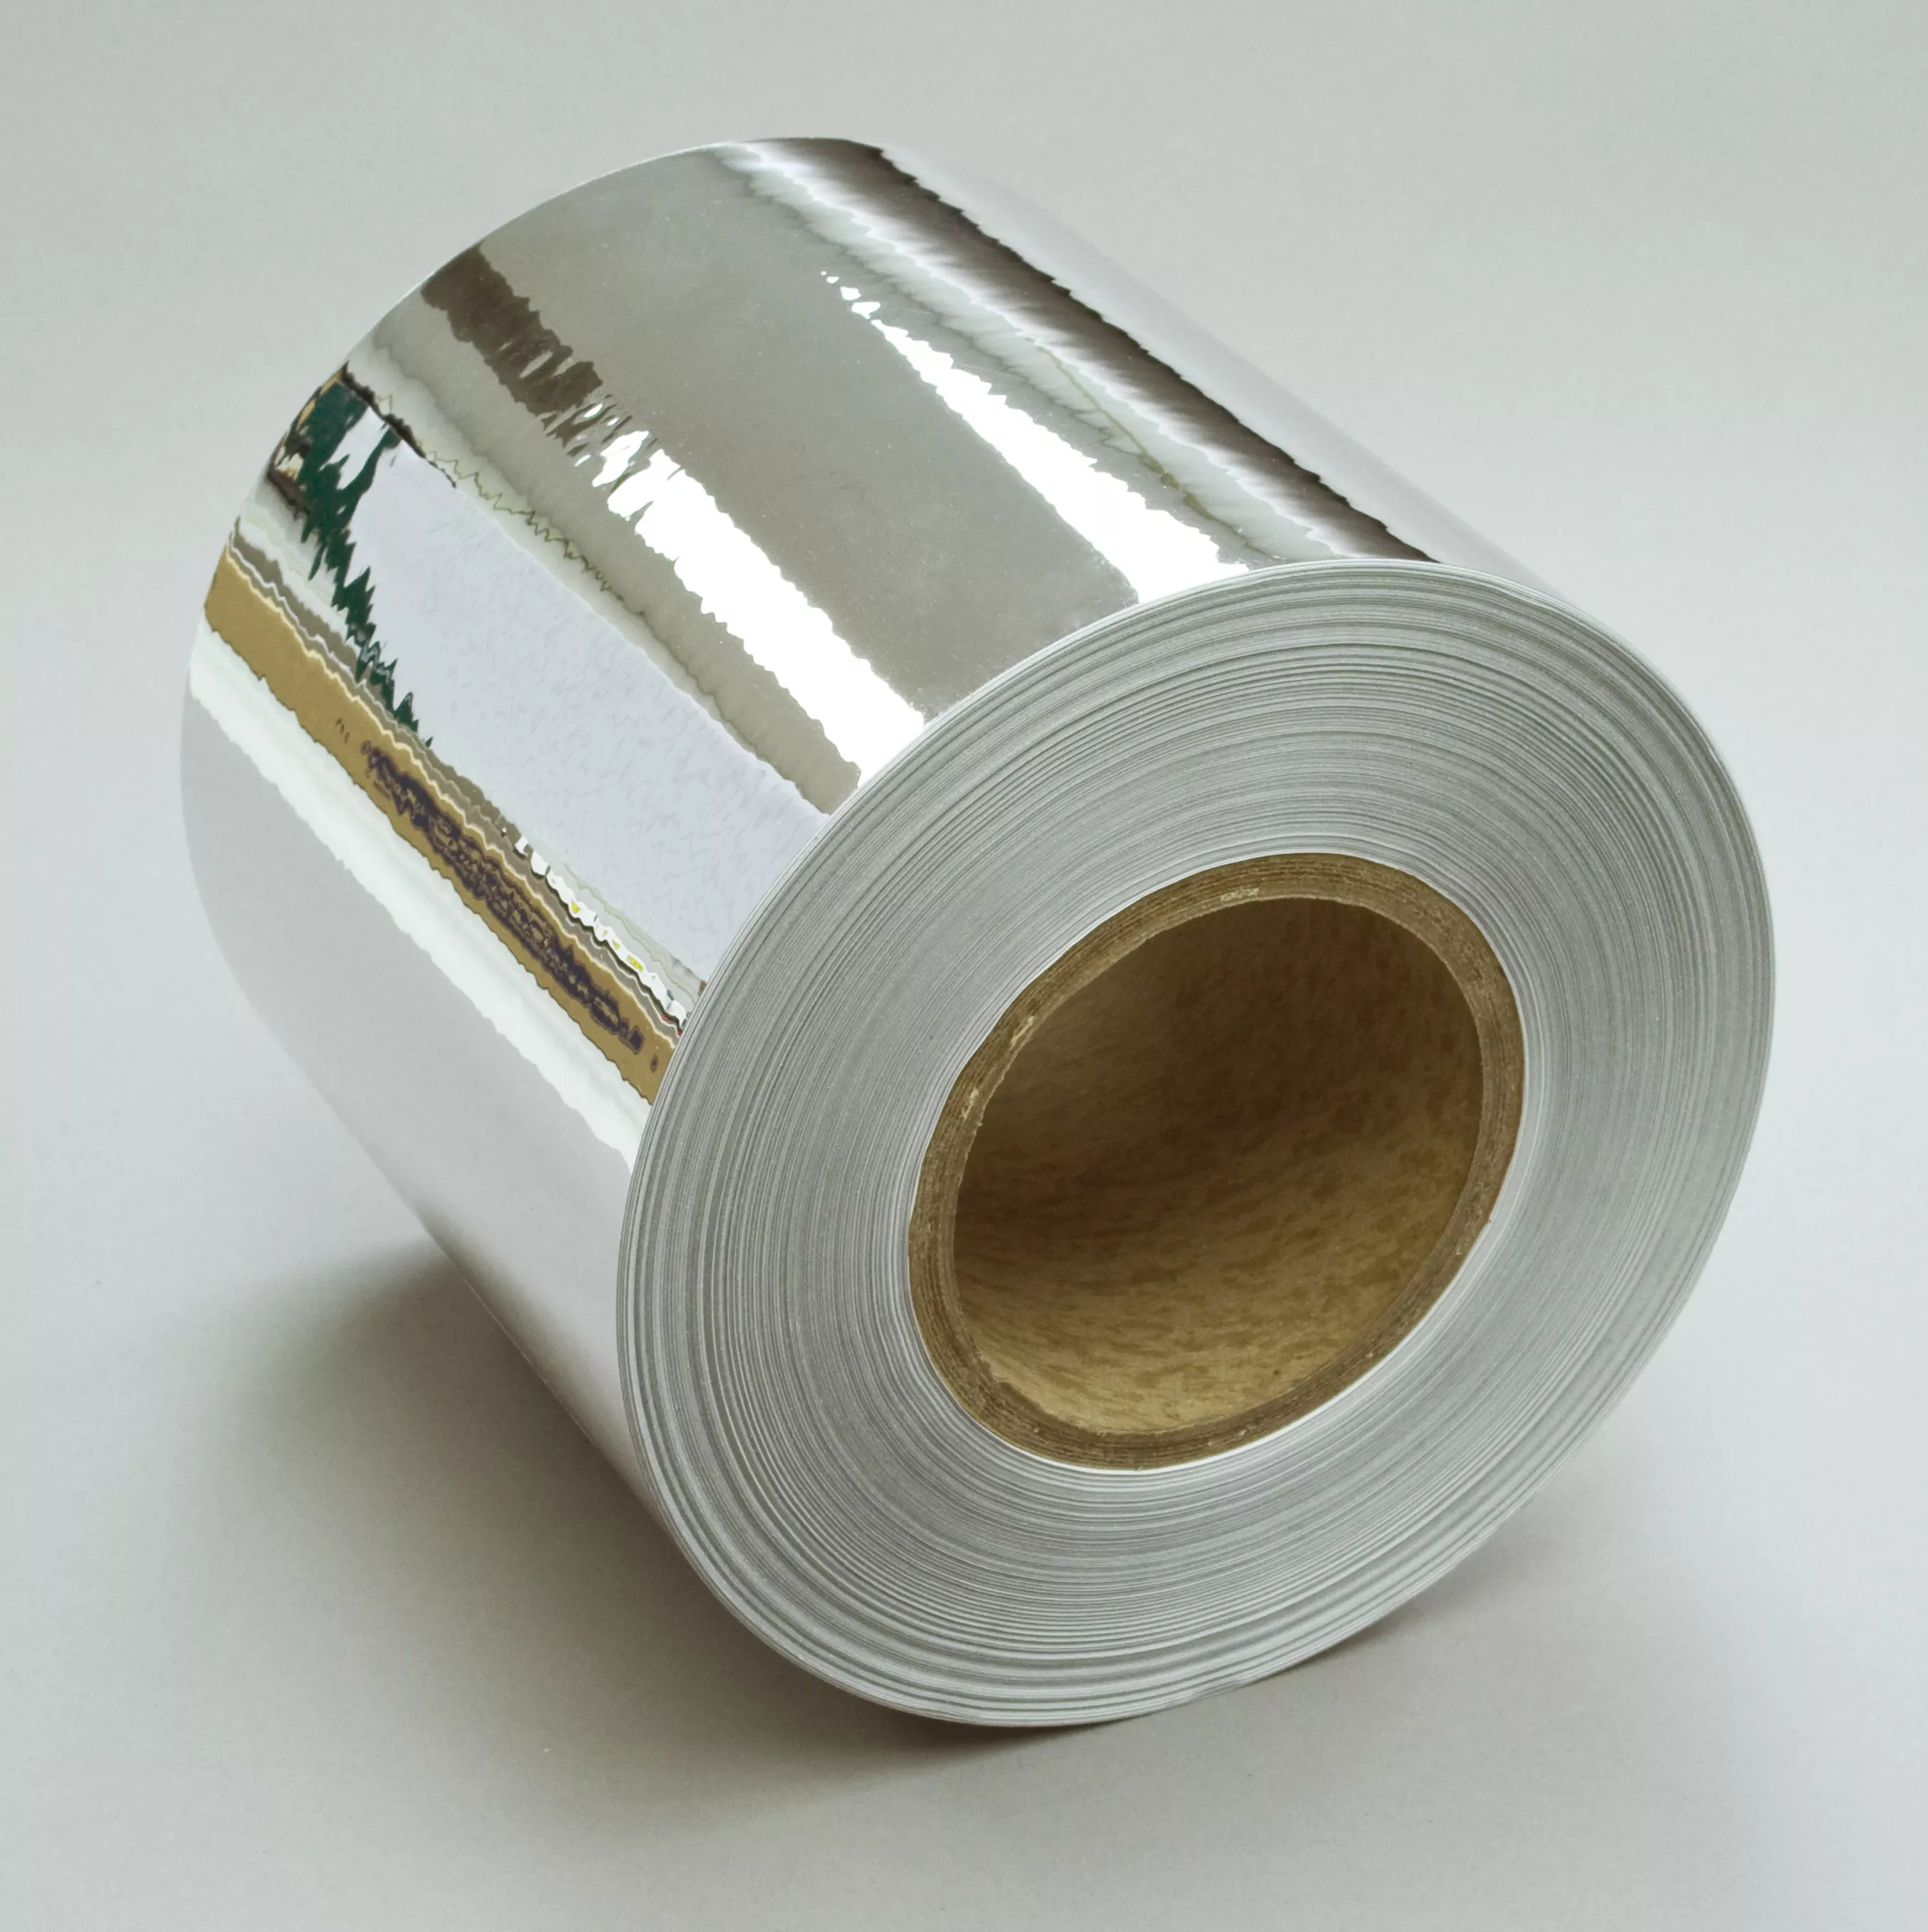 3M™ Screen Printable Sheet Polyester Label Material 7924, Silver, 508 mm x 686 mm, 100 Sheet/Case